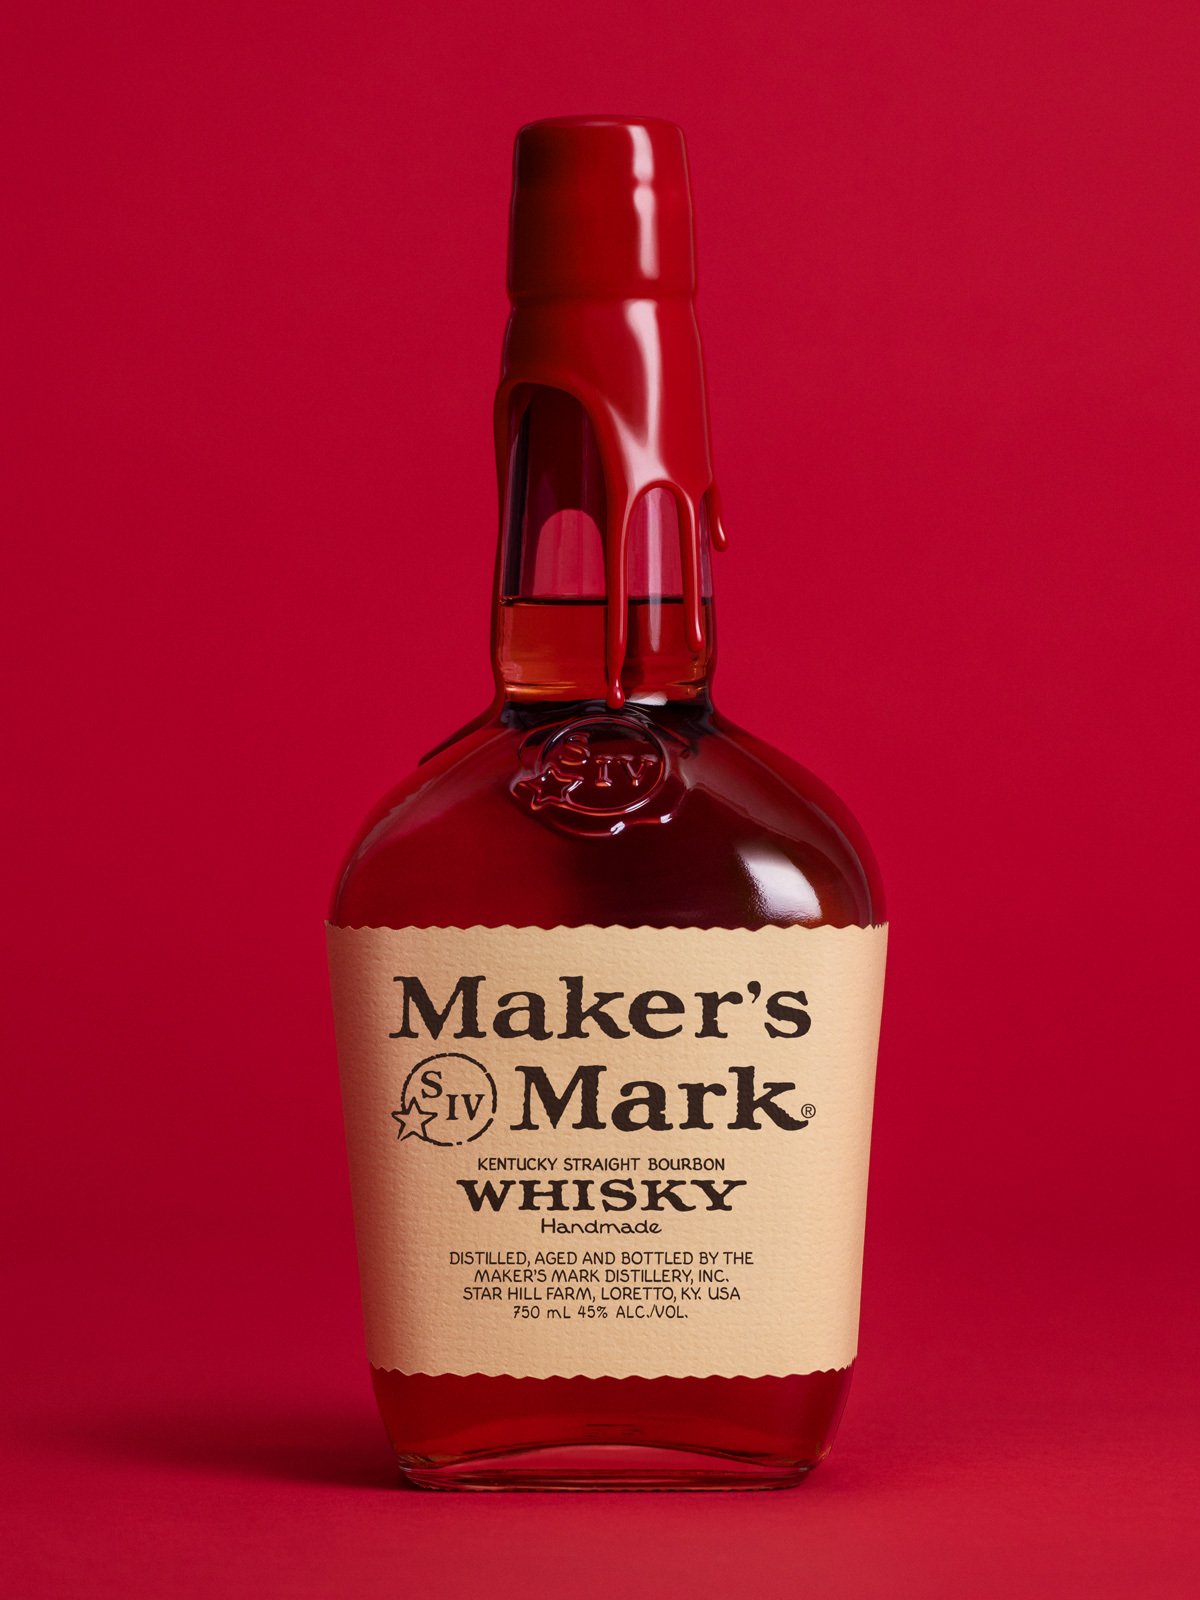 makers-mark-whisky-bottle-with-red-background-1200x1600.jpg